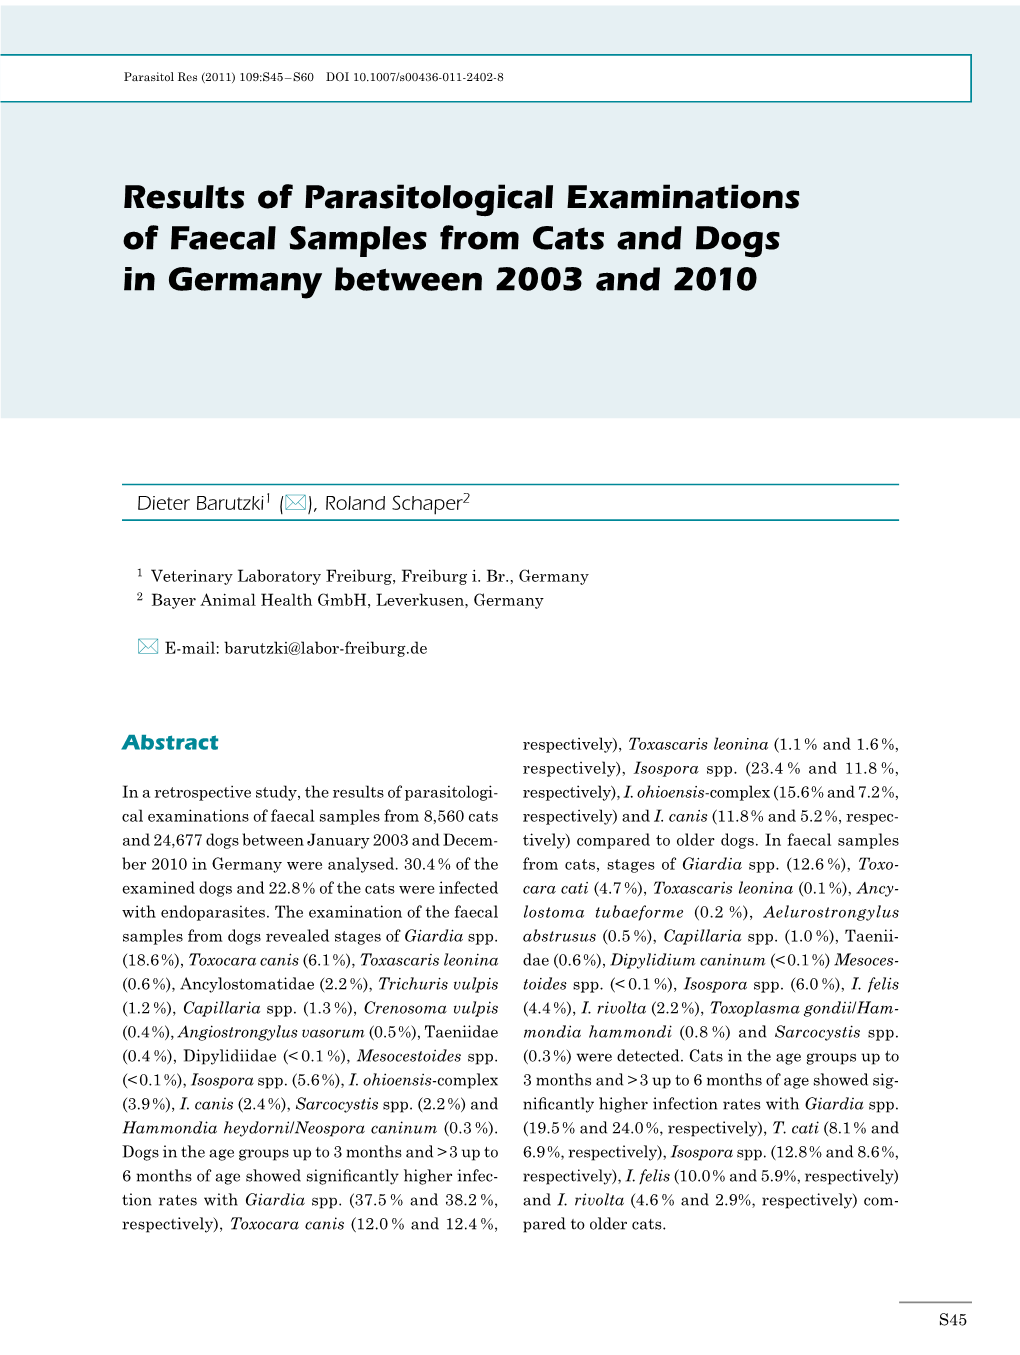 Results of Parasitological Examinations of Faecal Samples from Cats and Dogs in Germany Between 2003 and 2010